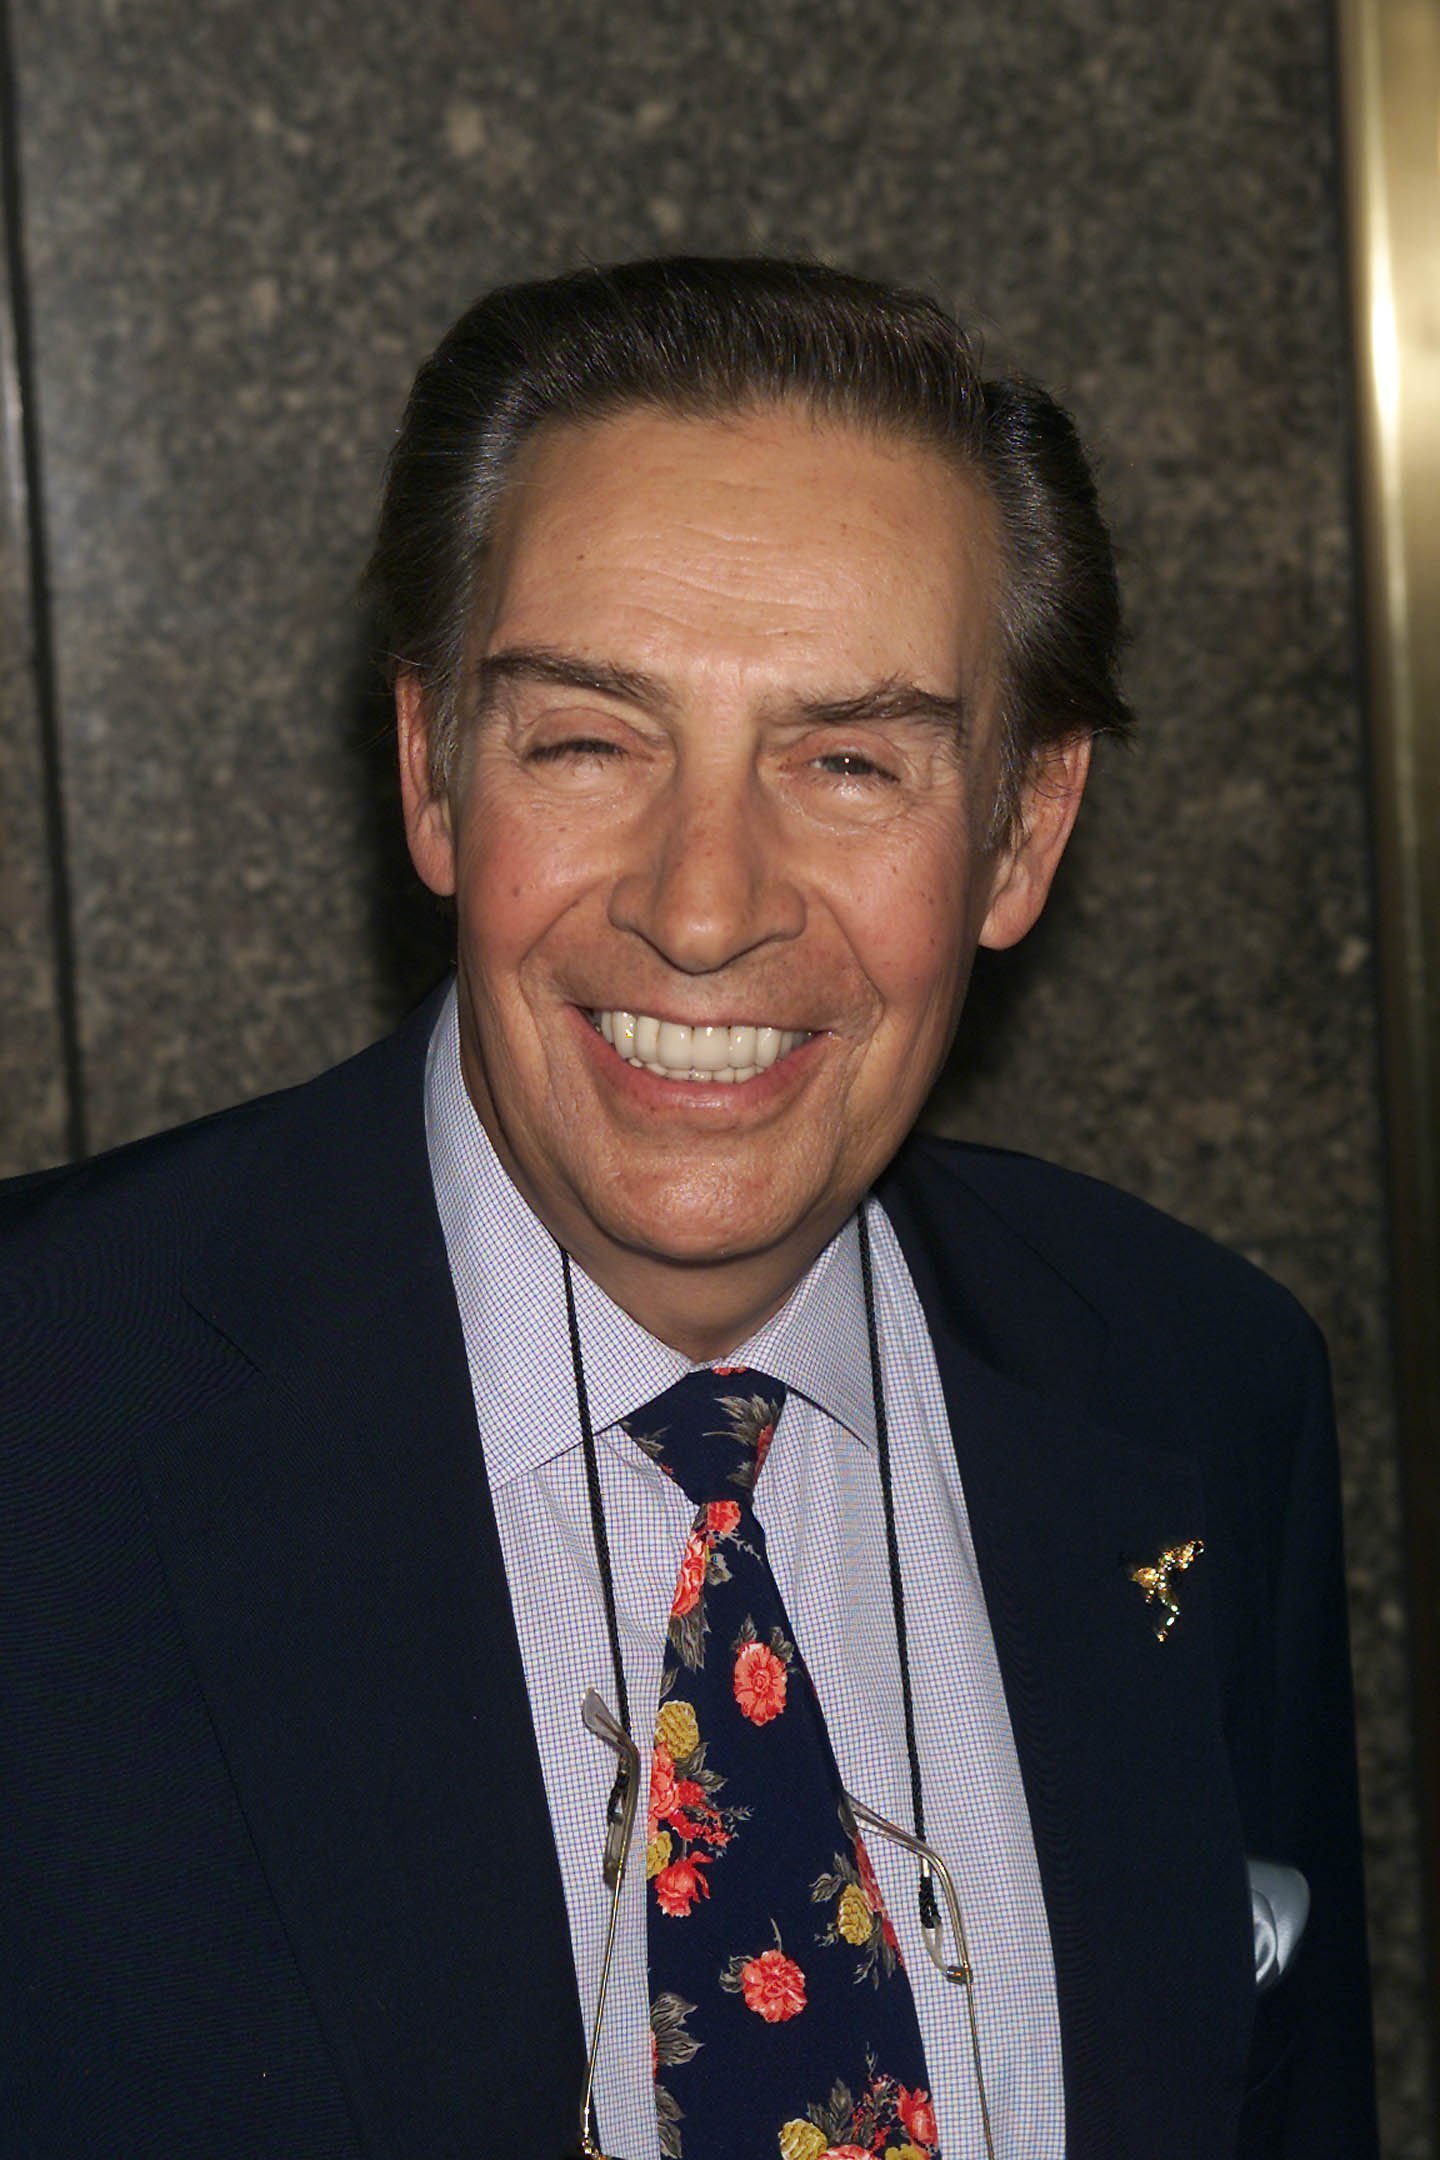 Jerry Orbach. I Image: Getty Images.